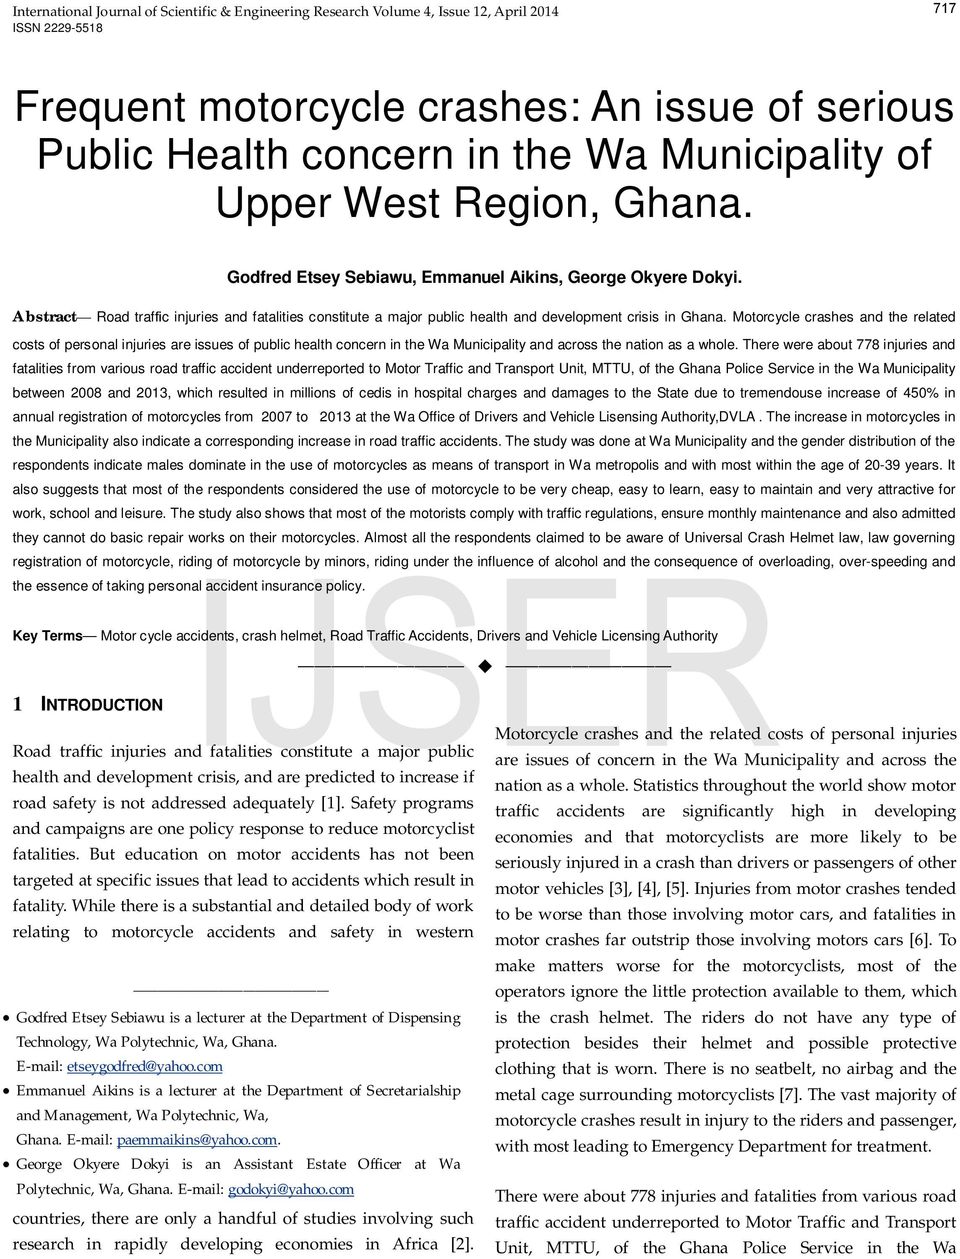 Abstract Road traf c injuries and fatalities constitute a major public health and development crisis in Ghana.